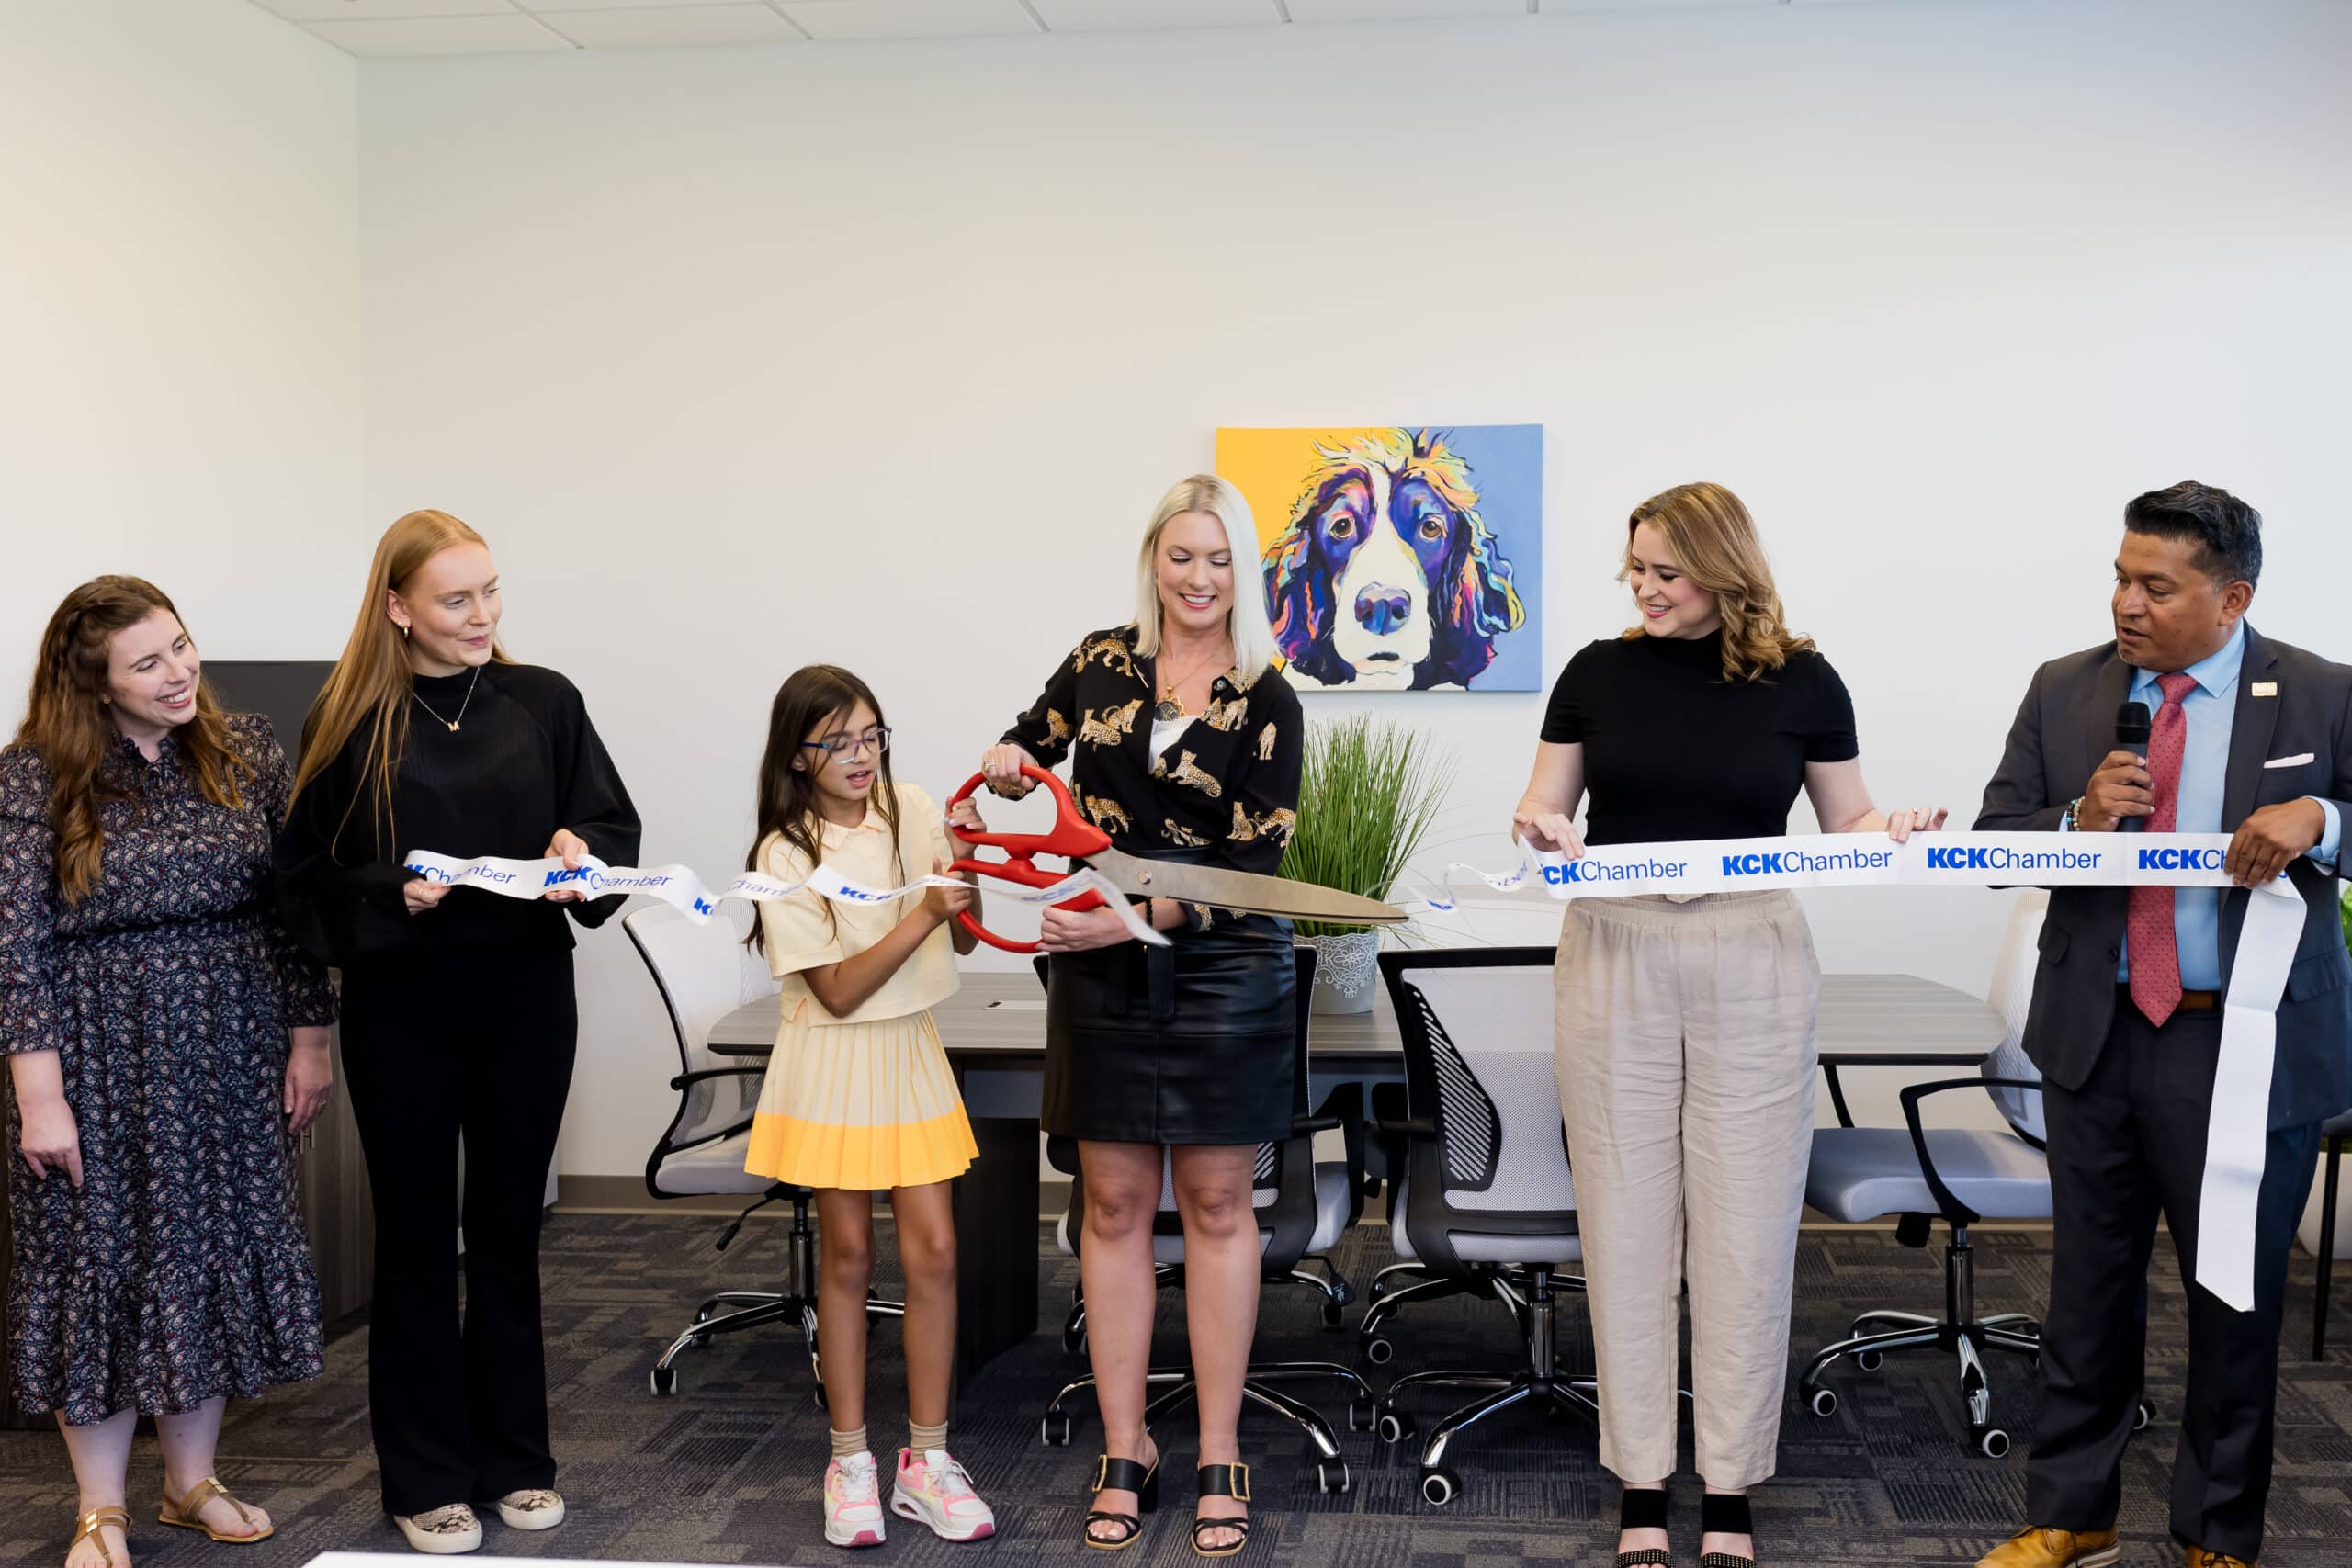 JSMM's 20th anniversary and new office ribbon cutting